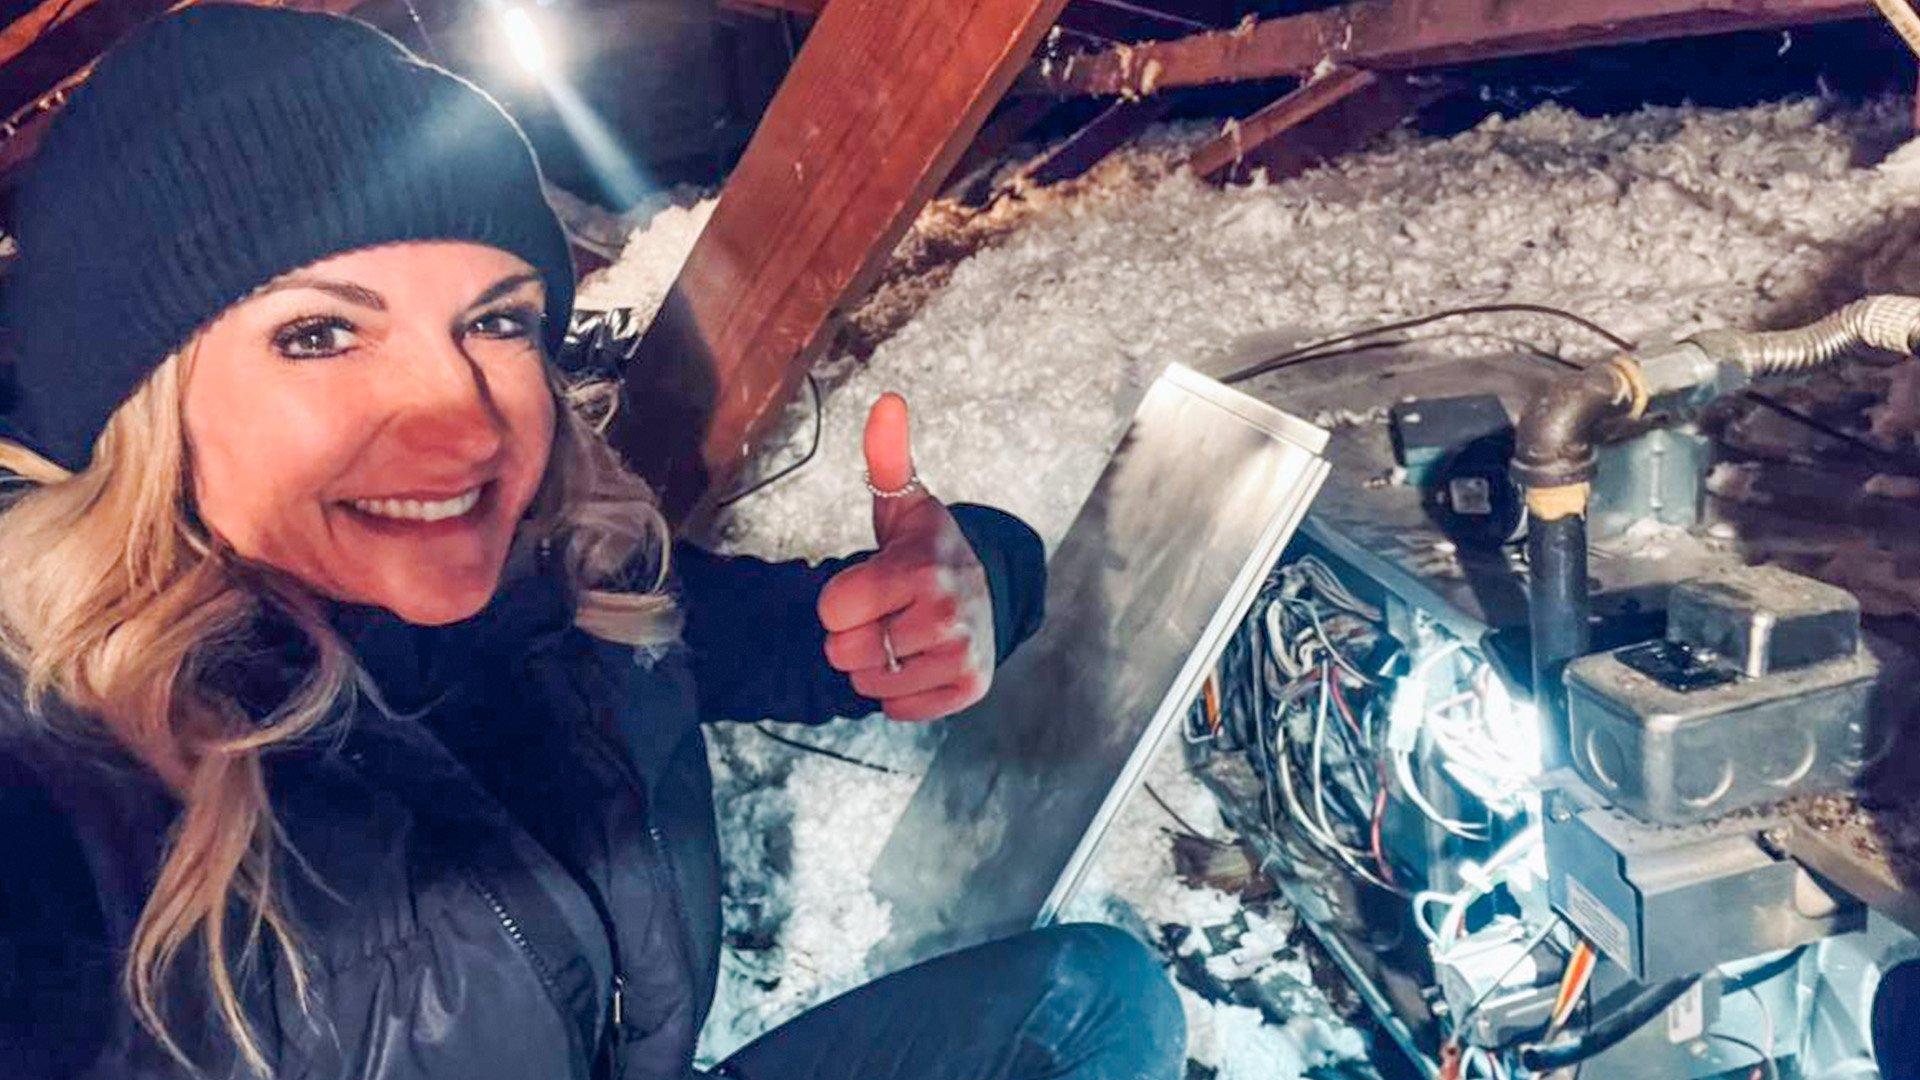 Megan W smiles and gives a thumbs-up next to an HVAC unit in a residential attic.